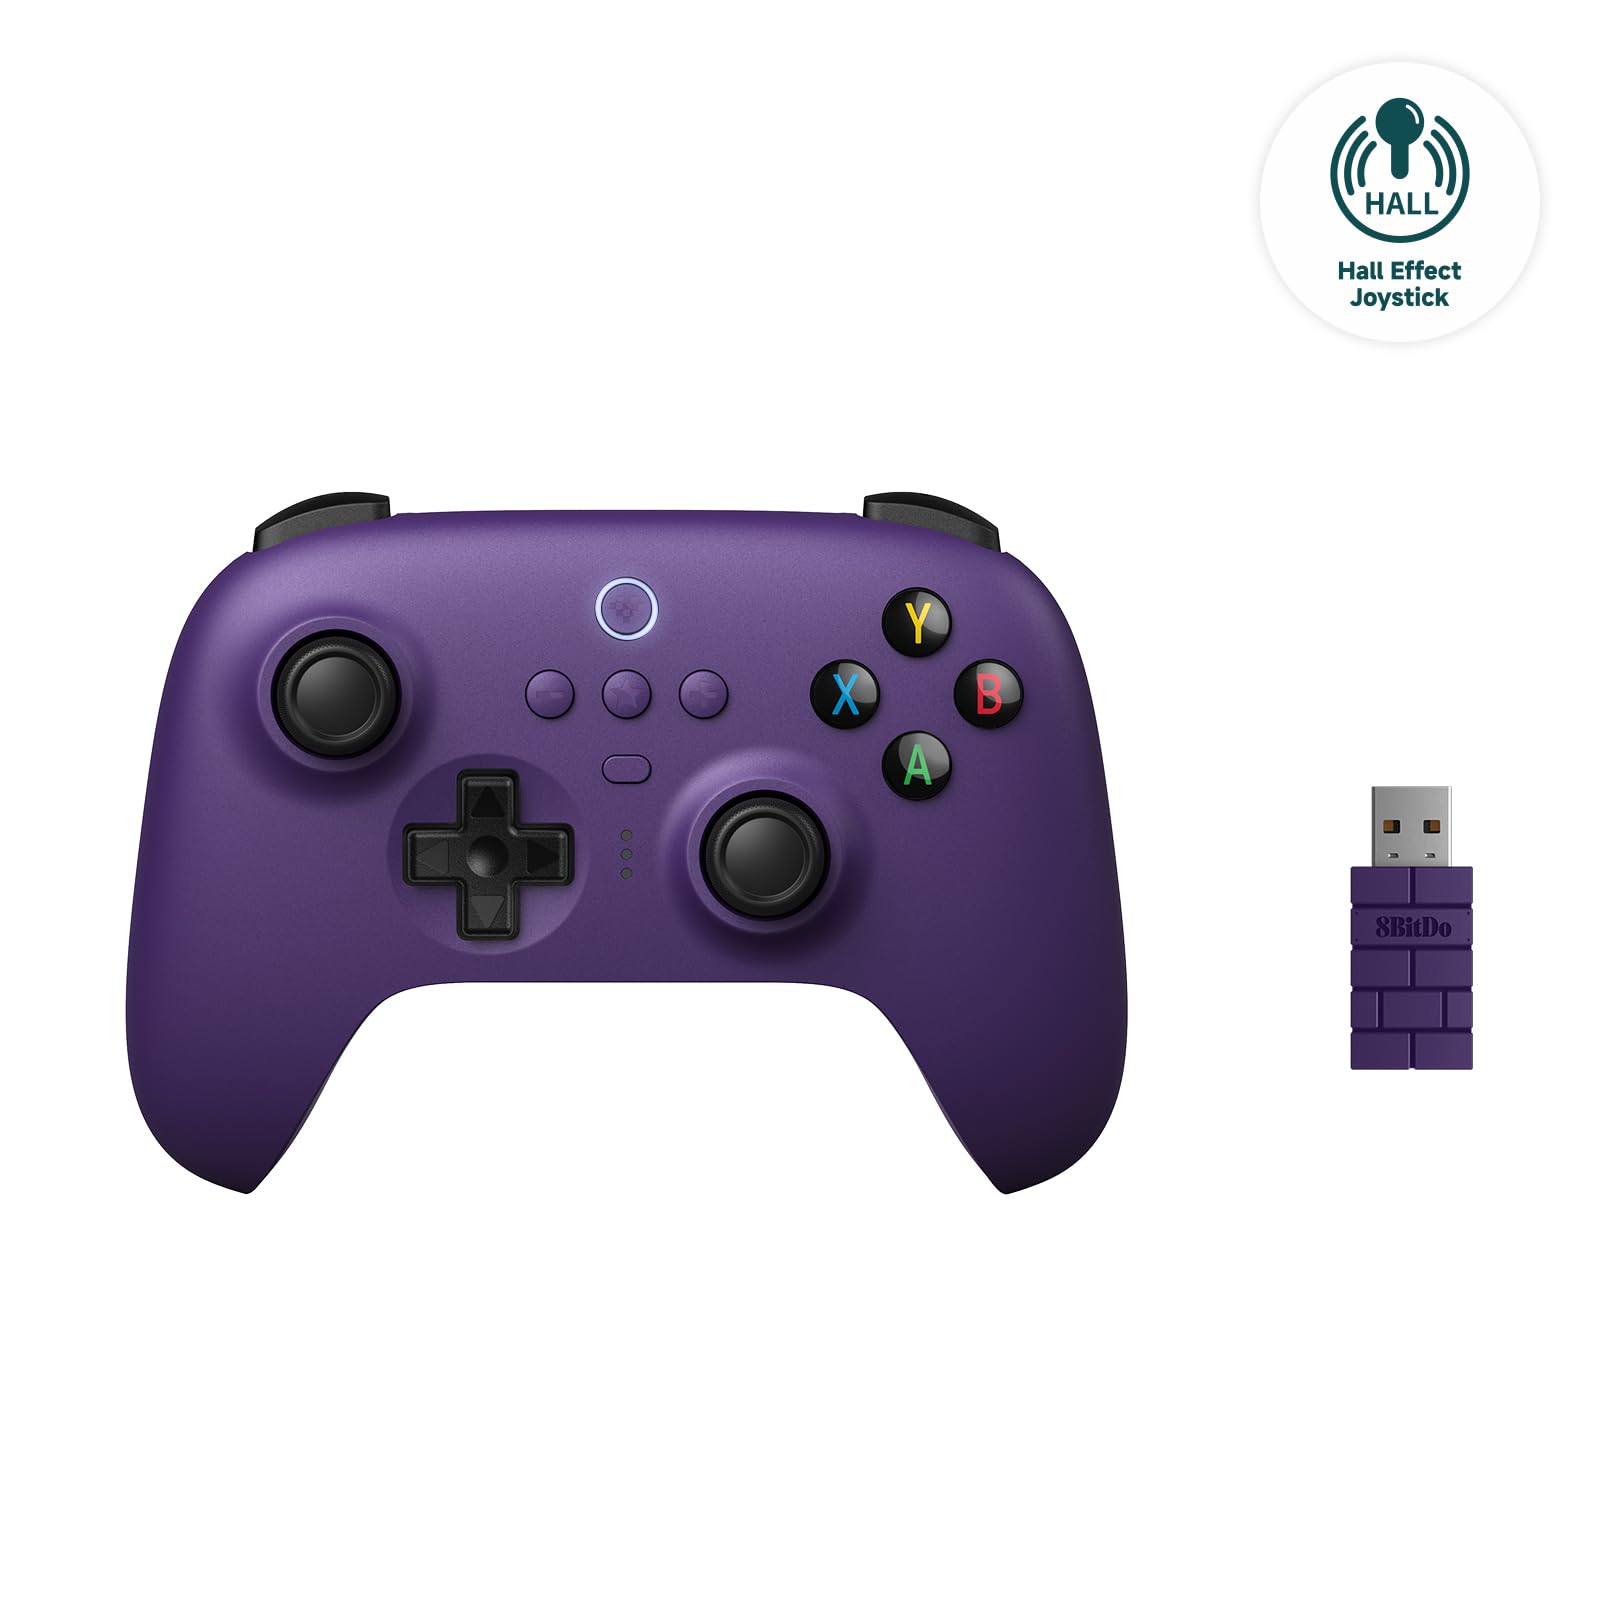 8Bitdo Ultimate 2.4G Wireless Controller, Hall Effect Joystick Update, Gaming Controller with Charging Dock for PC, Android, Steam Deck & Apple (Purple)